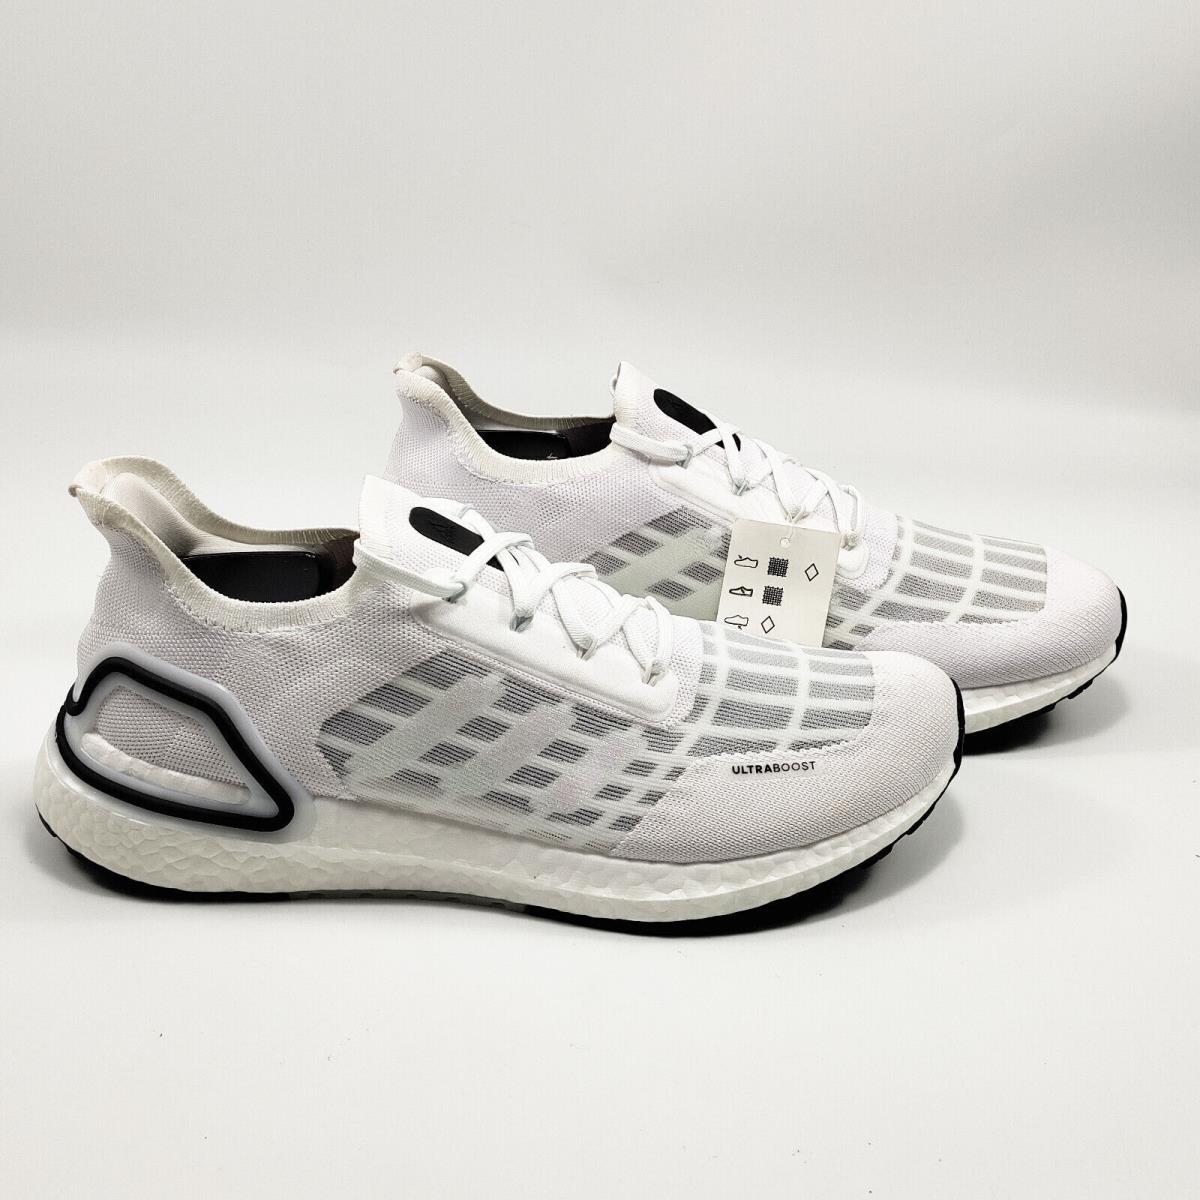 Adidas shoes UltraBoost - White 4